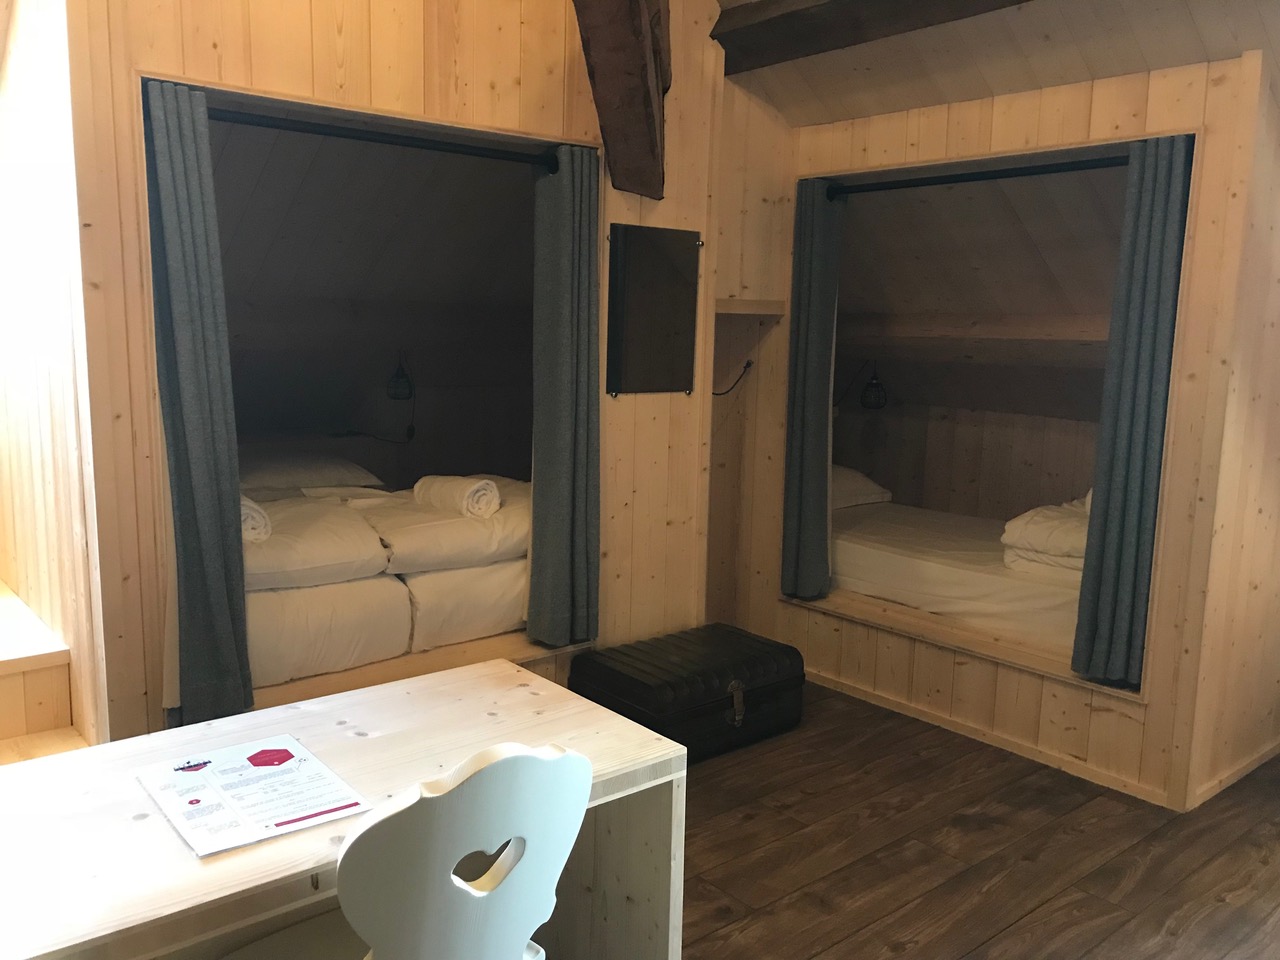 A detail of the beds in the dormitory at the Terminal Neige-Refuge: like little cocoons dug into the walls- Photo: The-Ski-Guru.